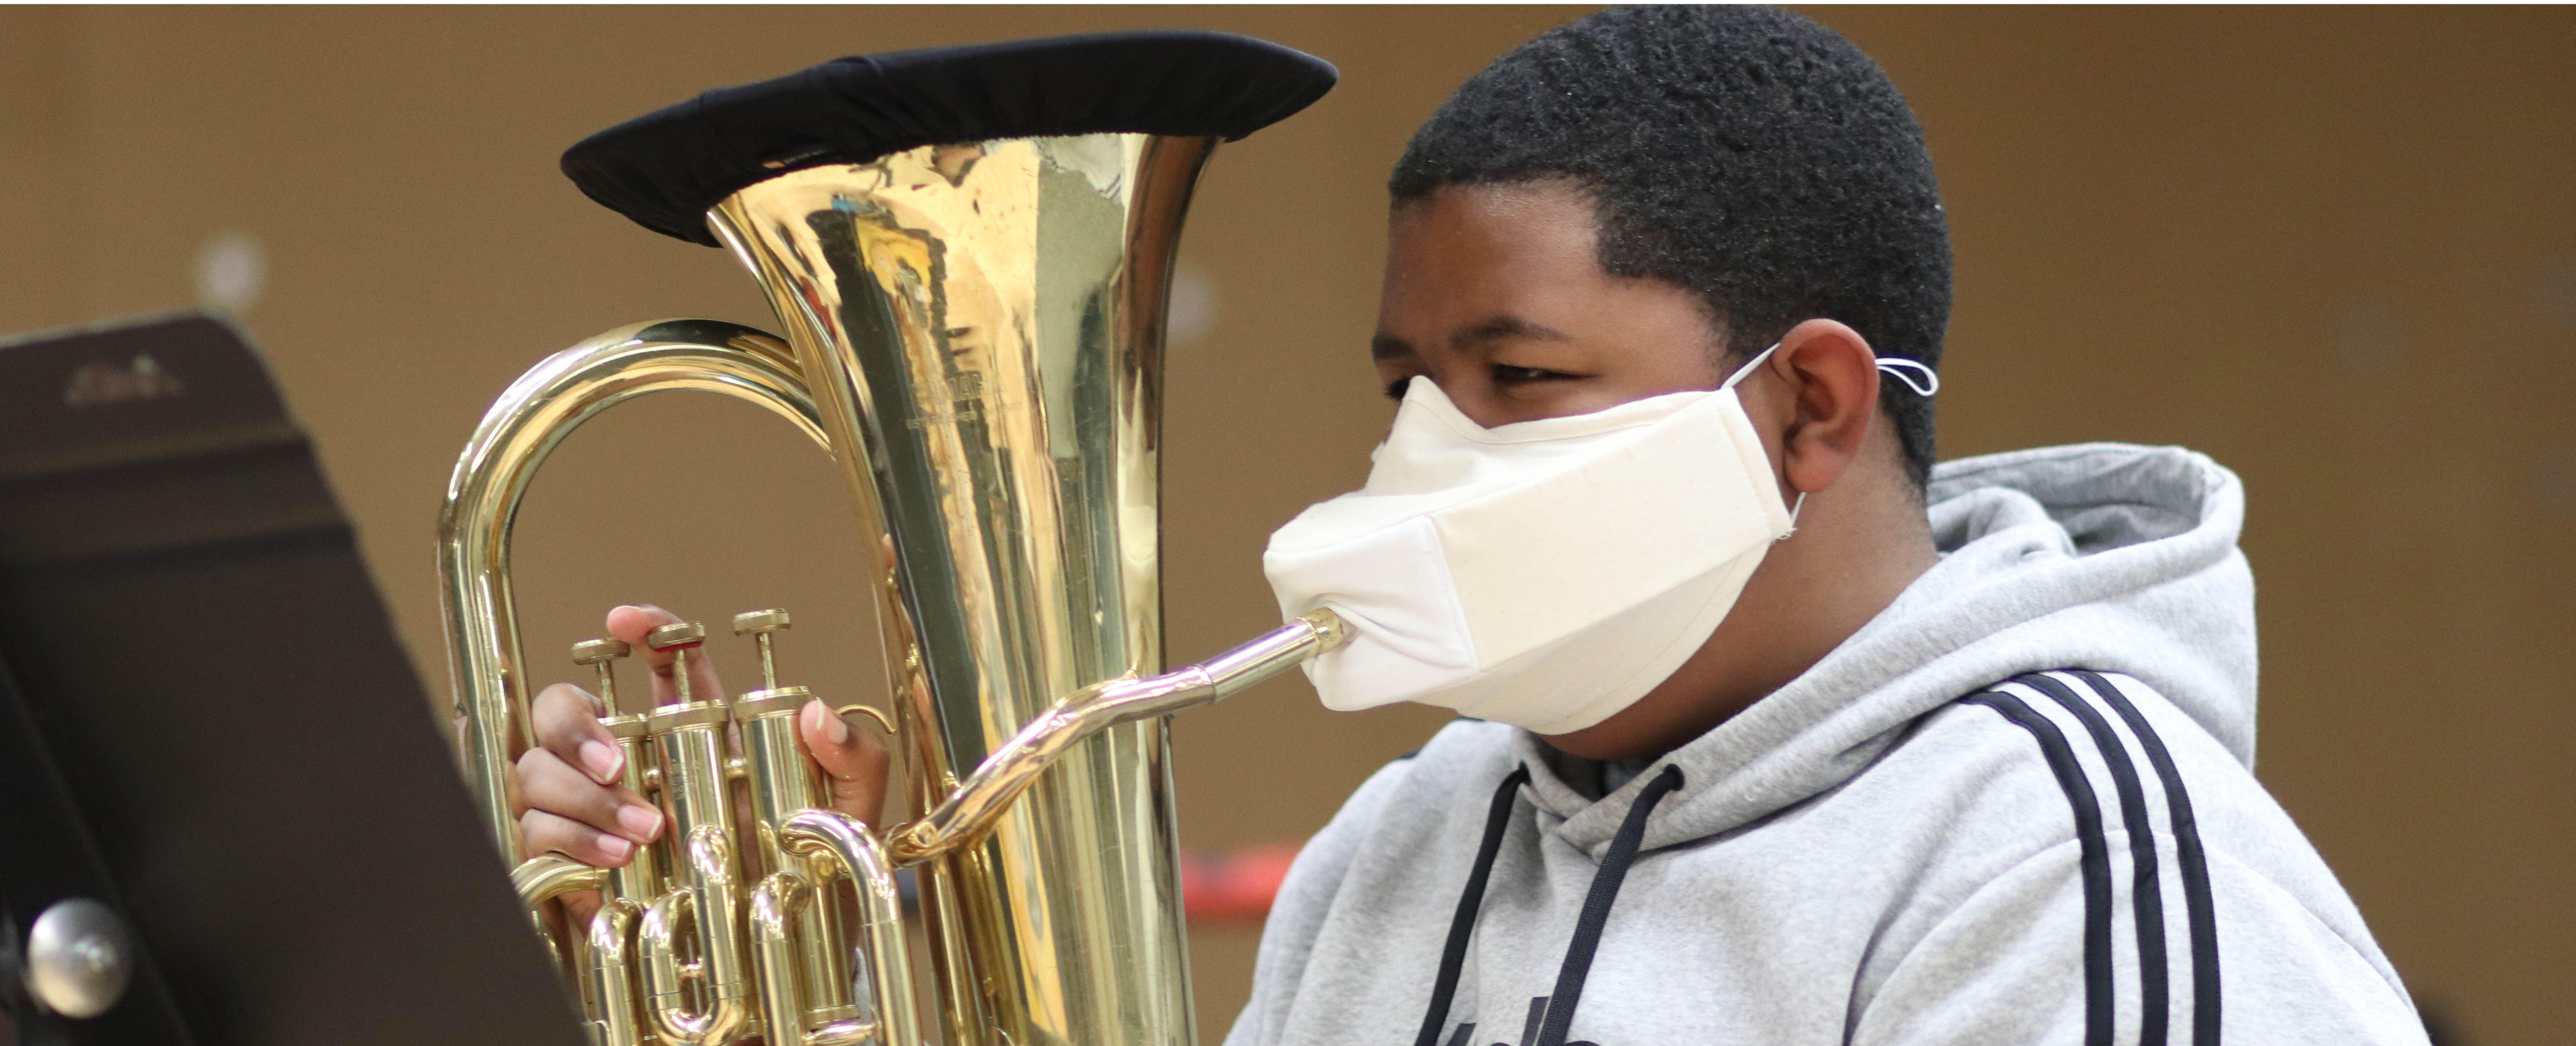 Student wearing a mask holding an instrument.